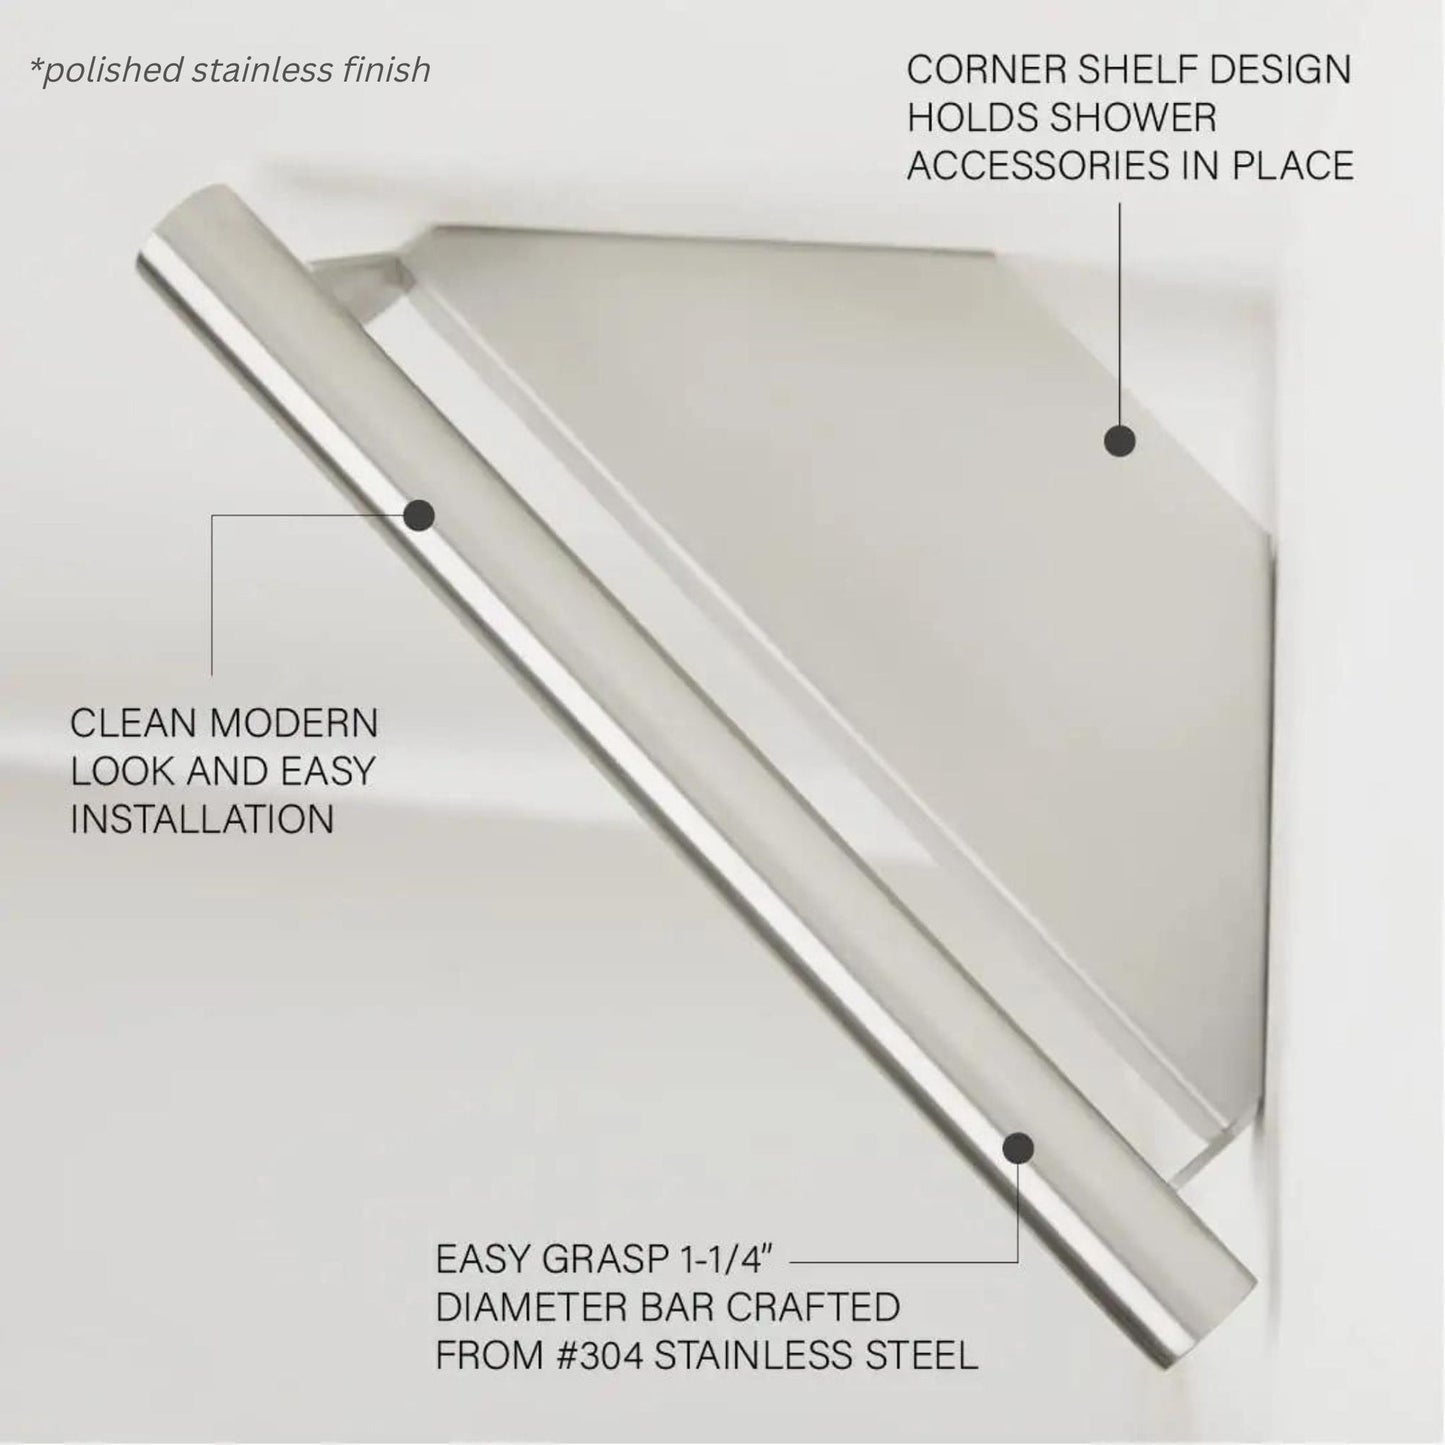 Seachrome Lifestyle and Wellness Series 14" x 8.5" Corner Shower Shelf With Handle in White Powder Coated Stainless Finish